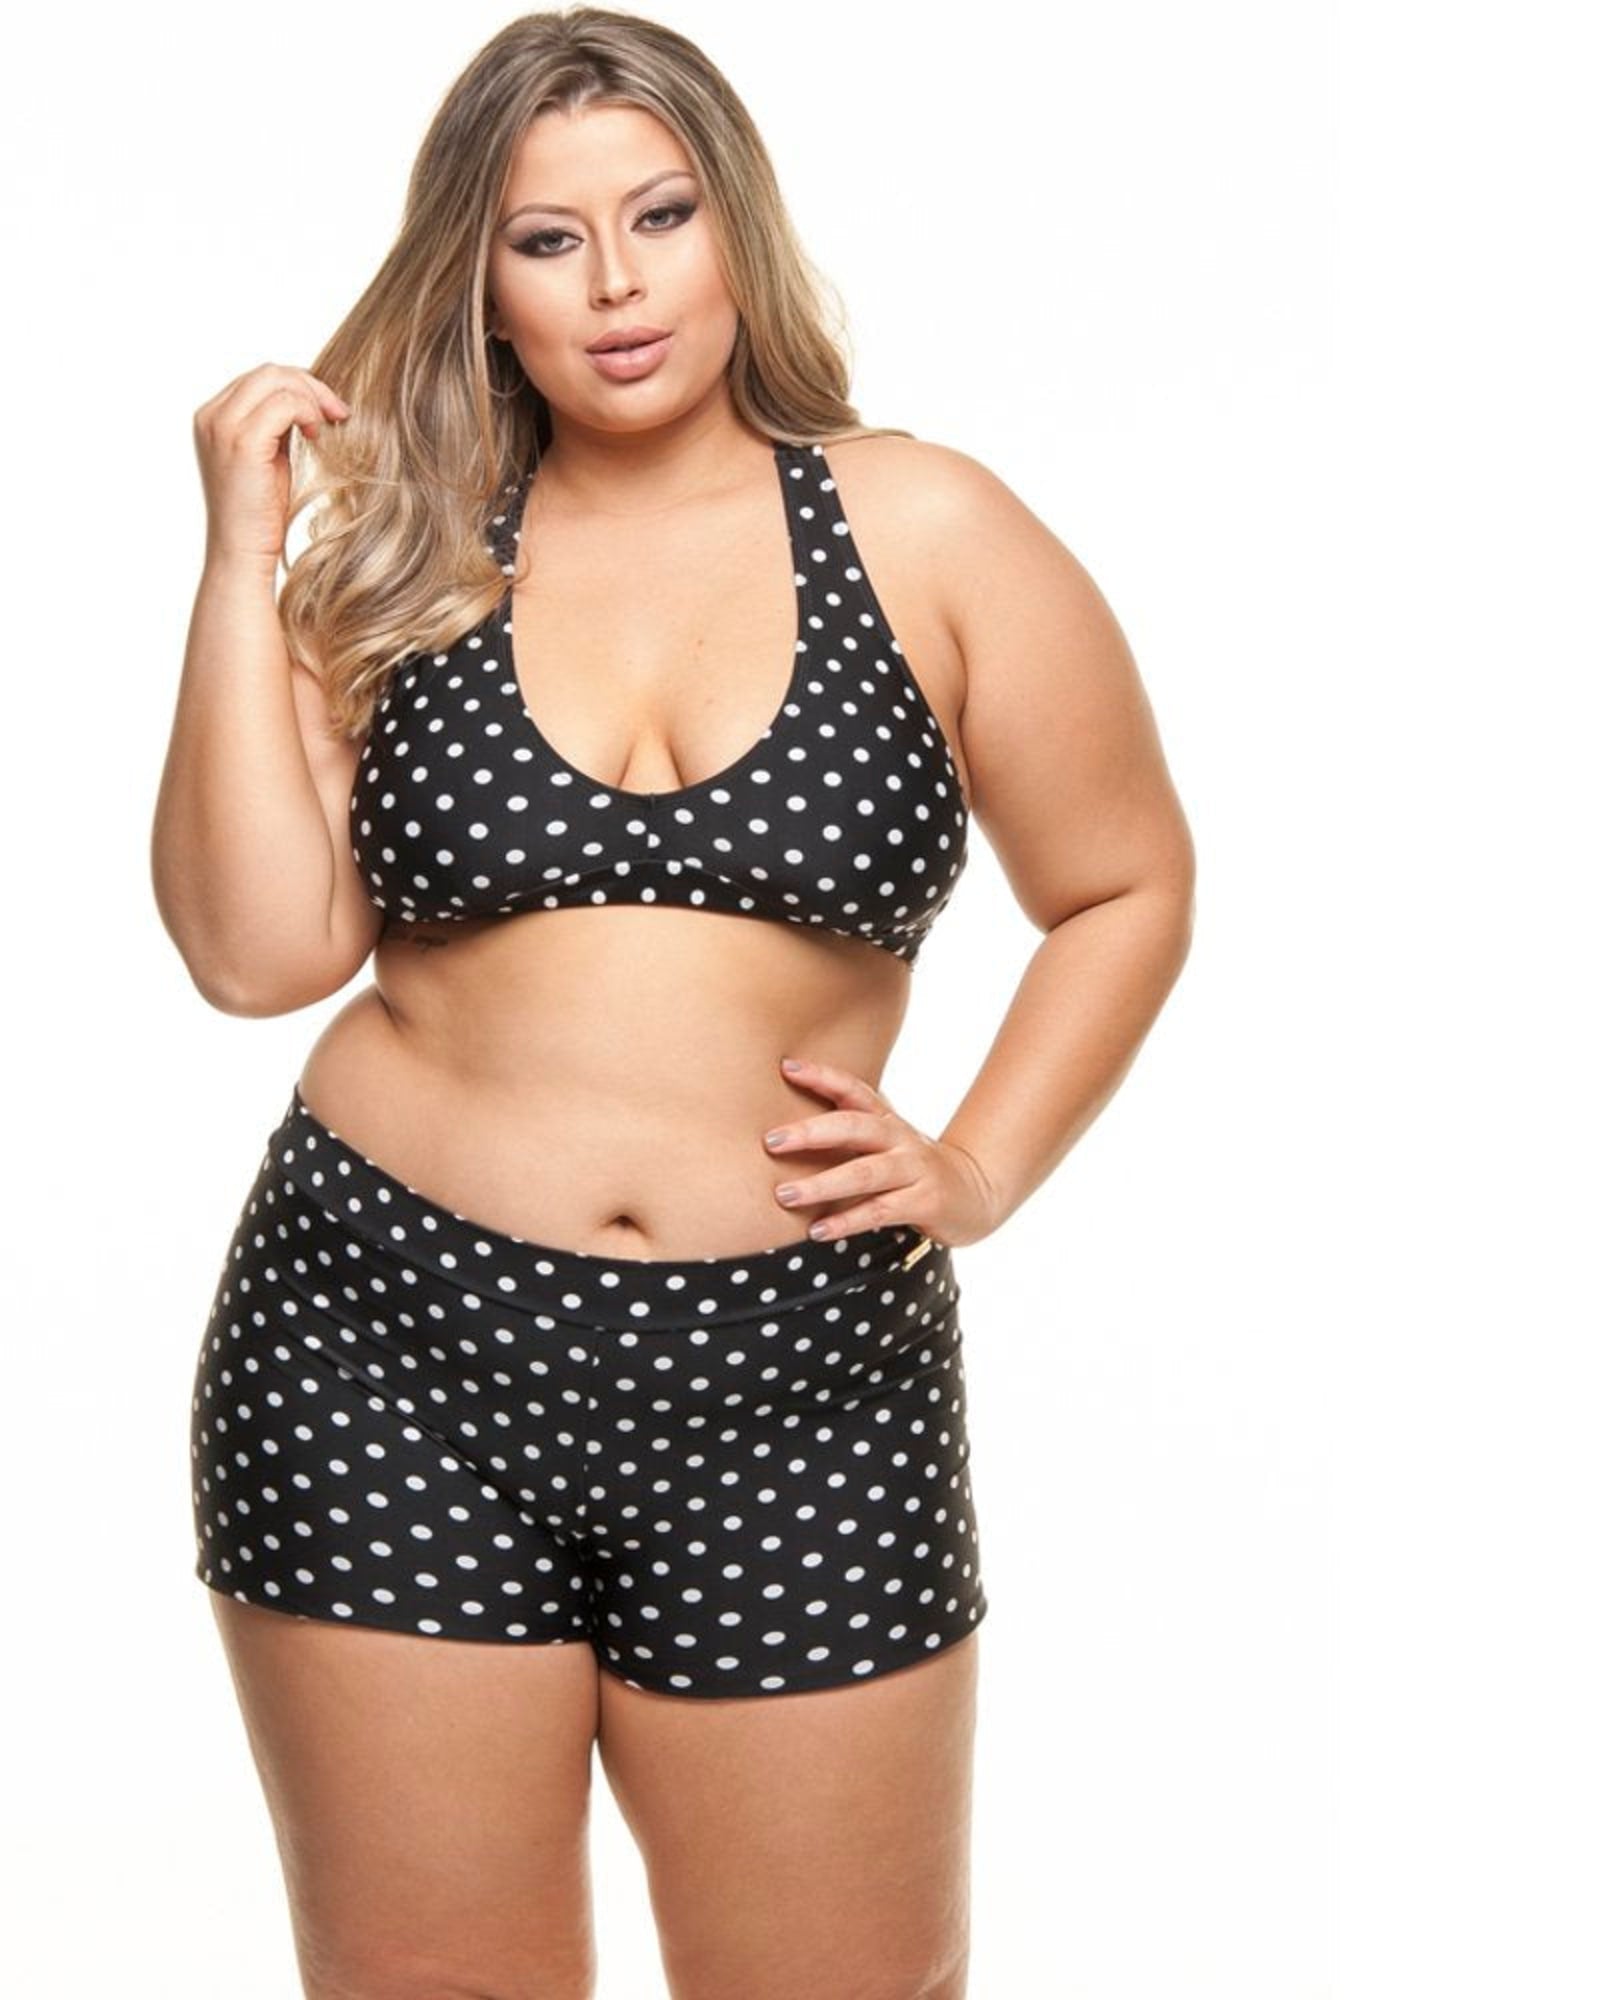 Good shorts for apple shaped bodies with no booty? I have tried on numerous  shorts and the back of them are like parachutes lol. : r/PlusSizeFashion